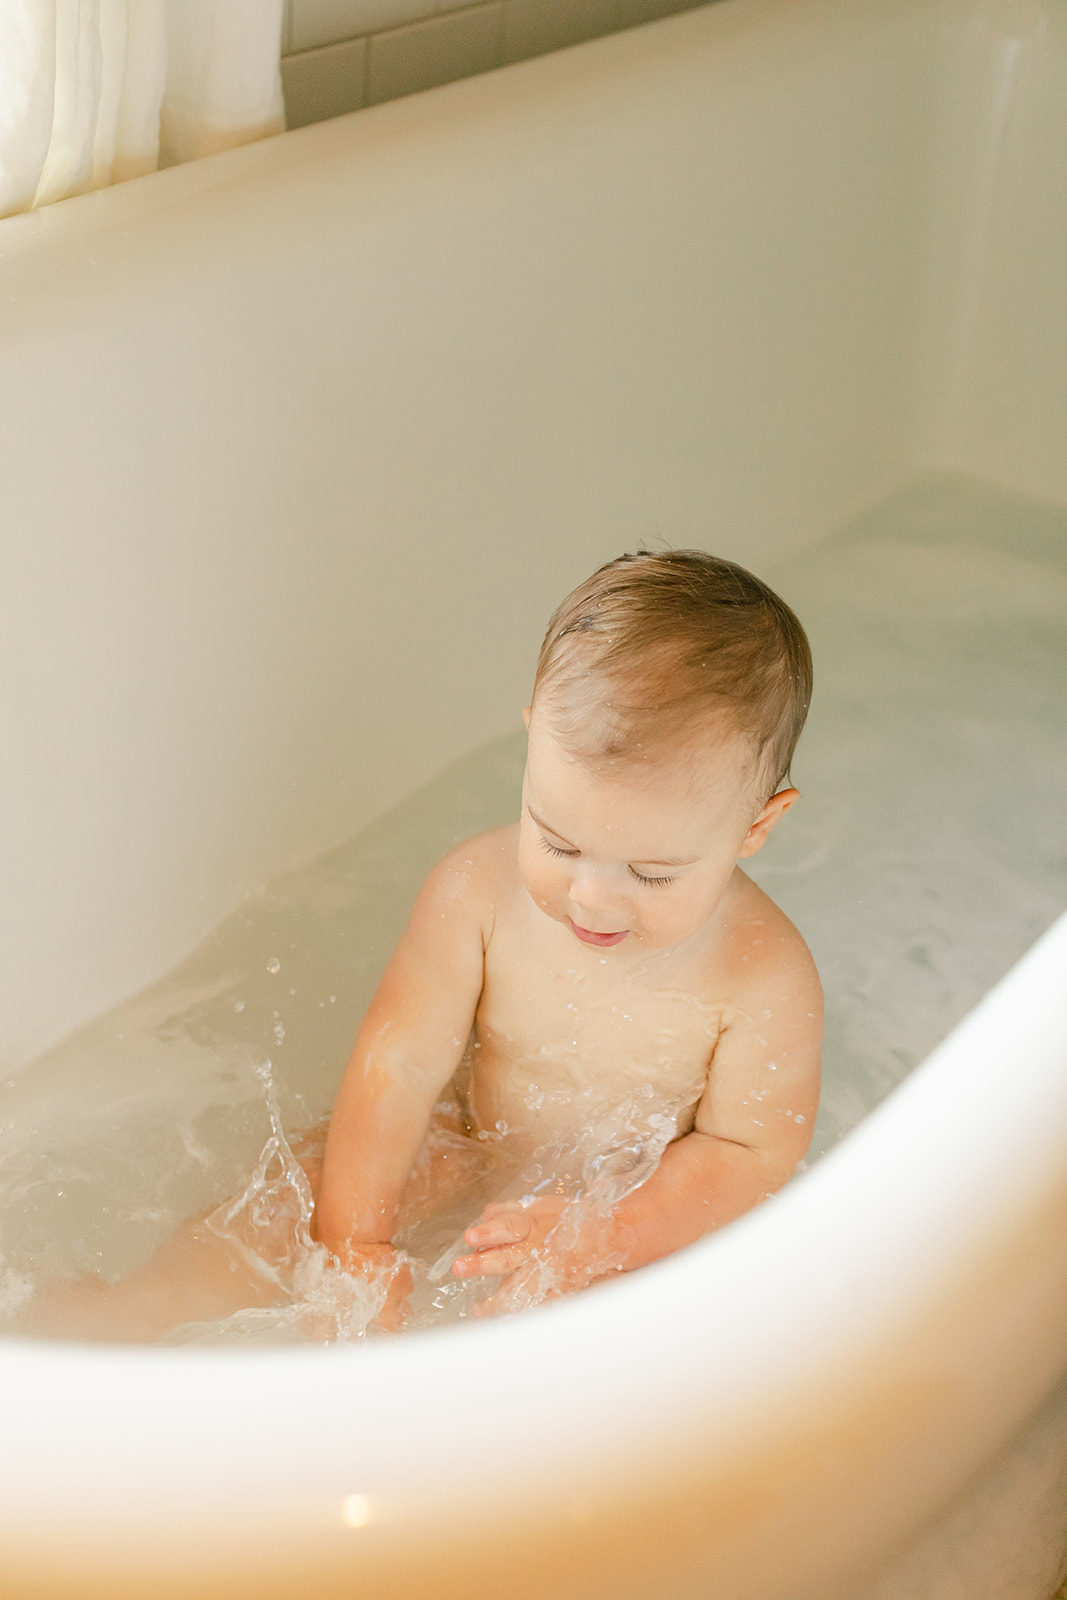 1 year milestone session for baby boy. Cozy at home session. baby boy in bathtub